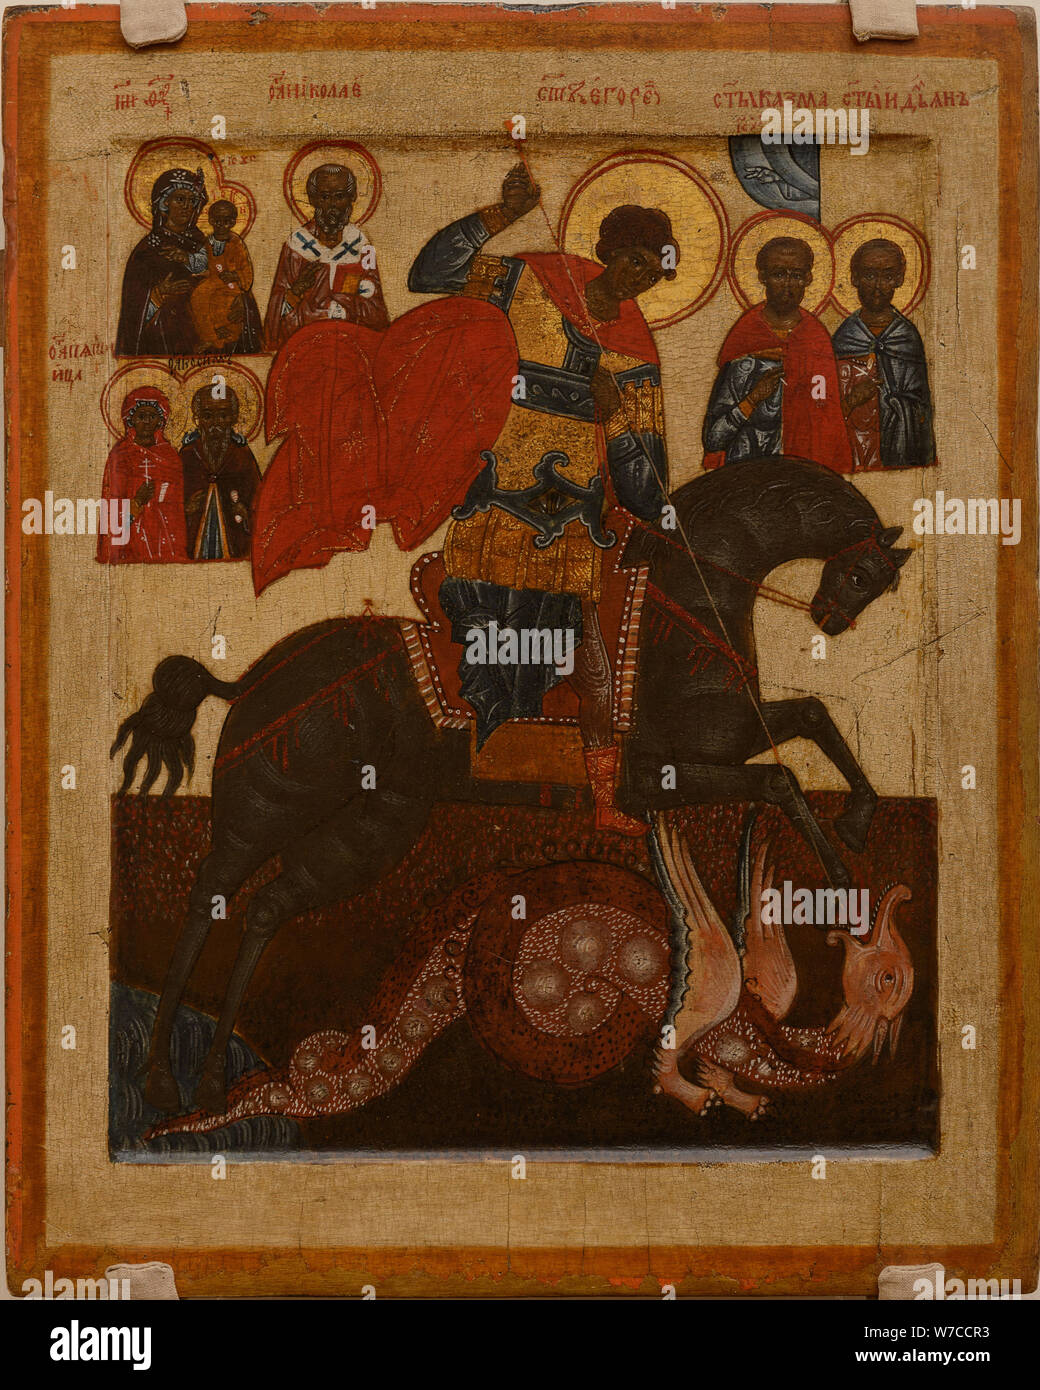 Saint George with Selected Saints. Stock Photo